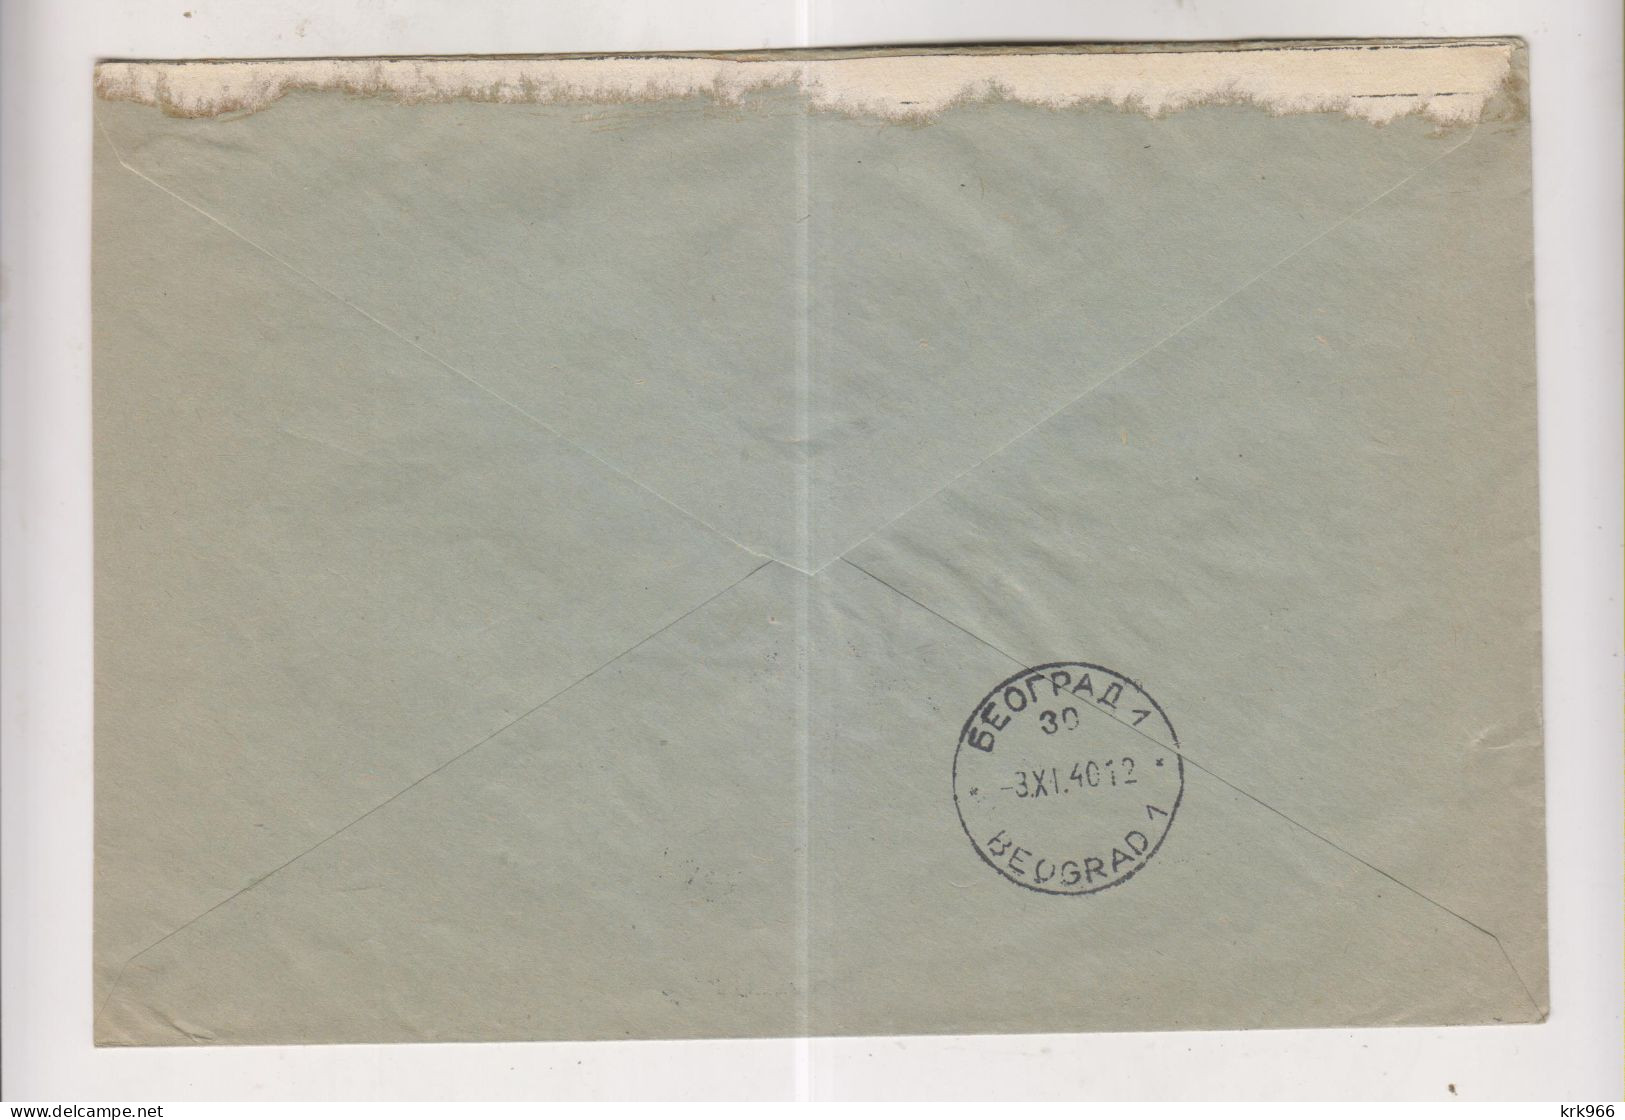 YUGOSLAVIA,1940 NIS Nice Official Cover To Beograd Postage Due - Covers & Documents